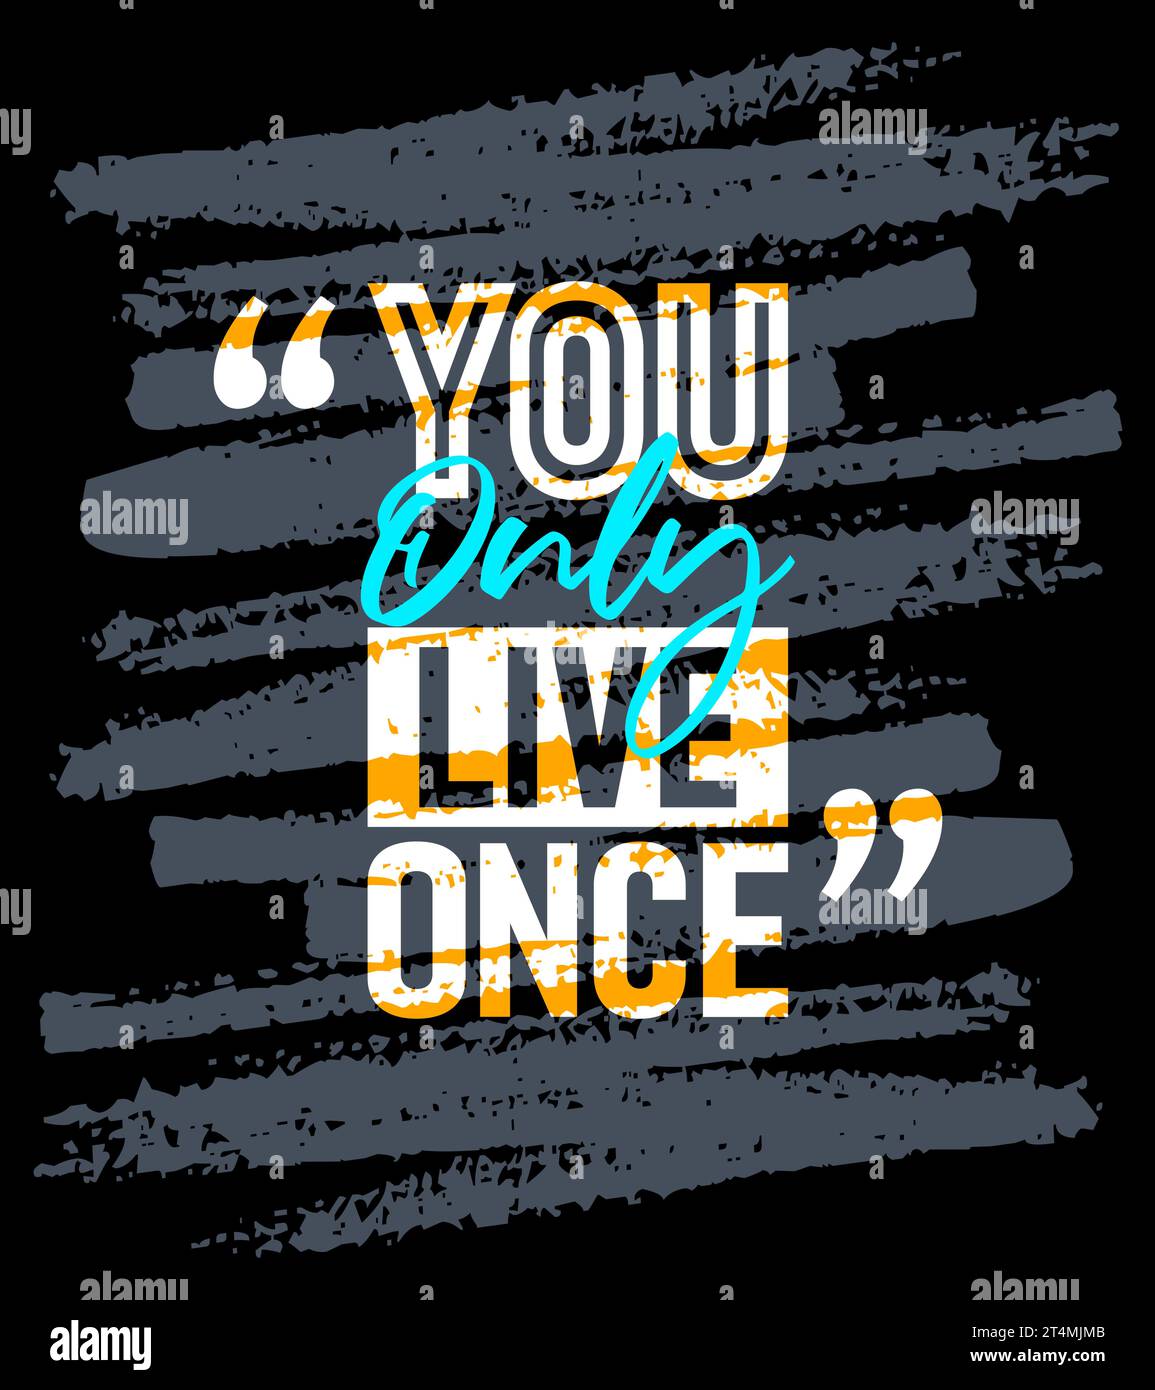 You only live once motivational quotes stroke, Short phrases quotes, typography, slogan grunge Stock Vector